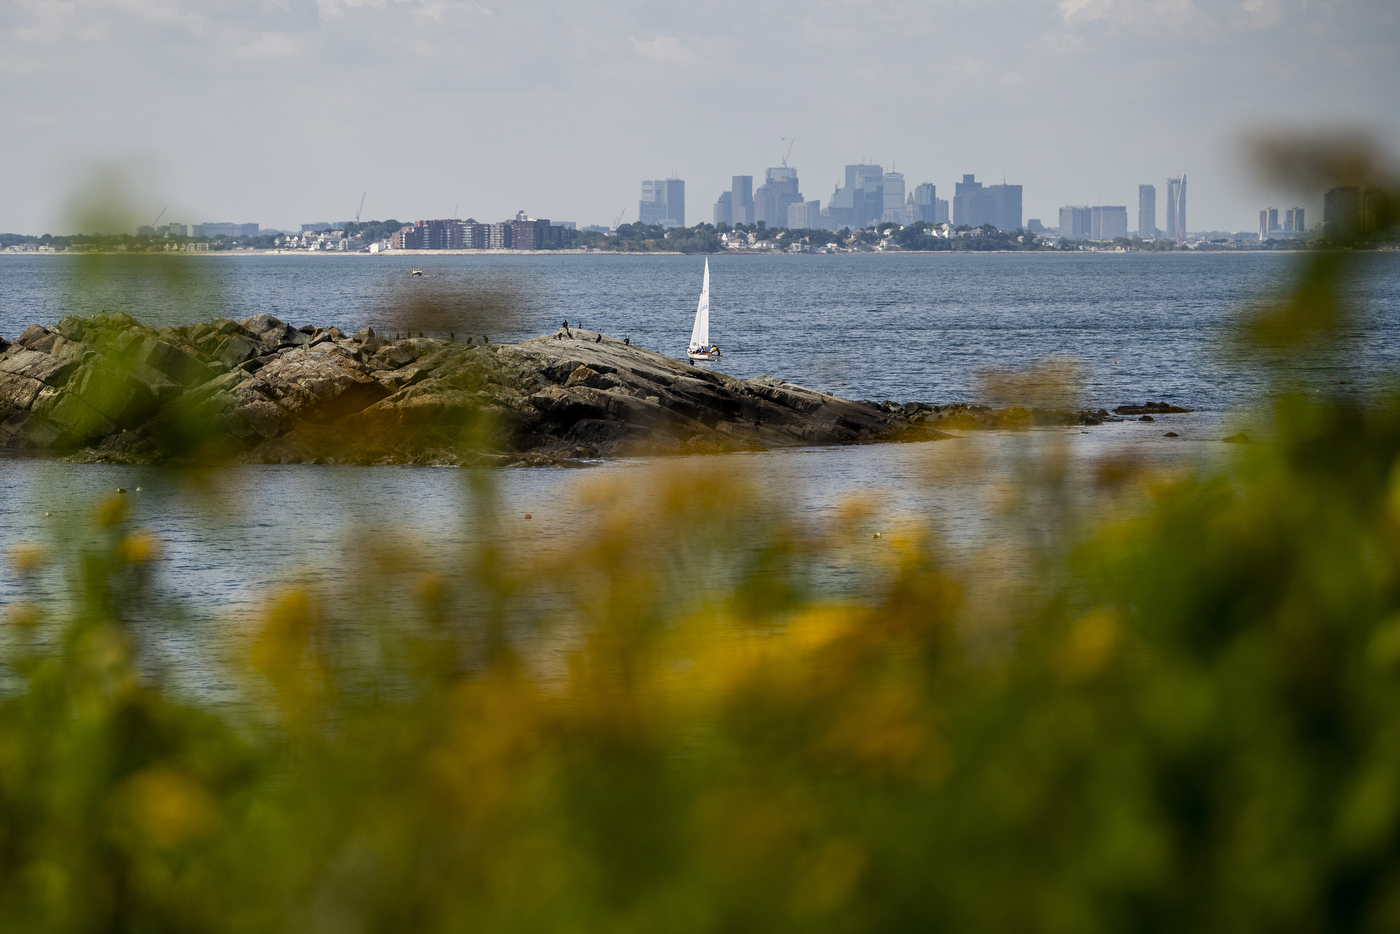 A view of the Boston skyline across the water from Nahant